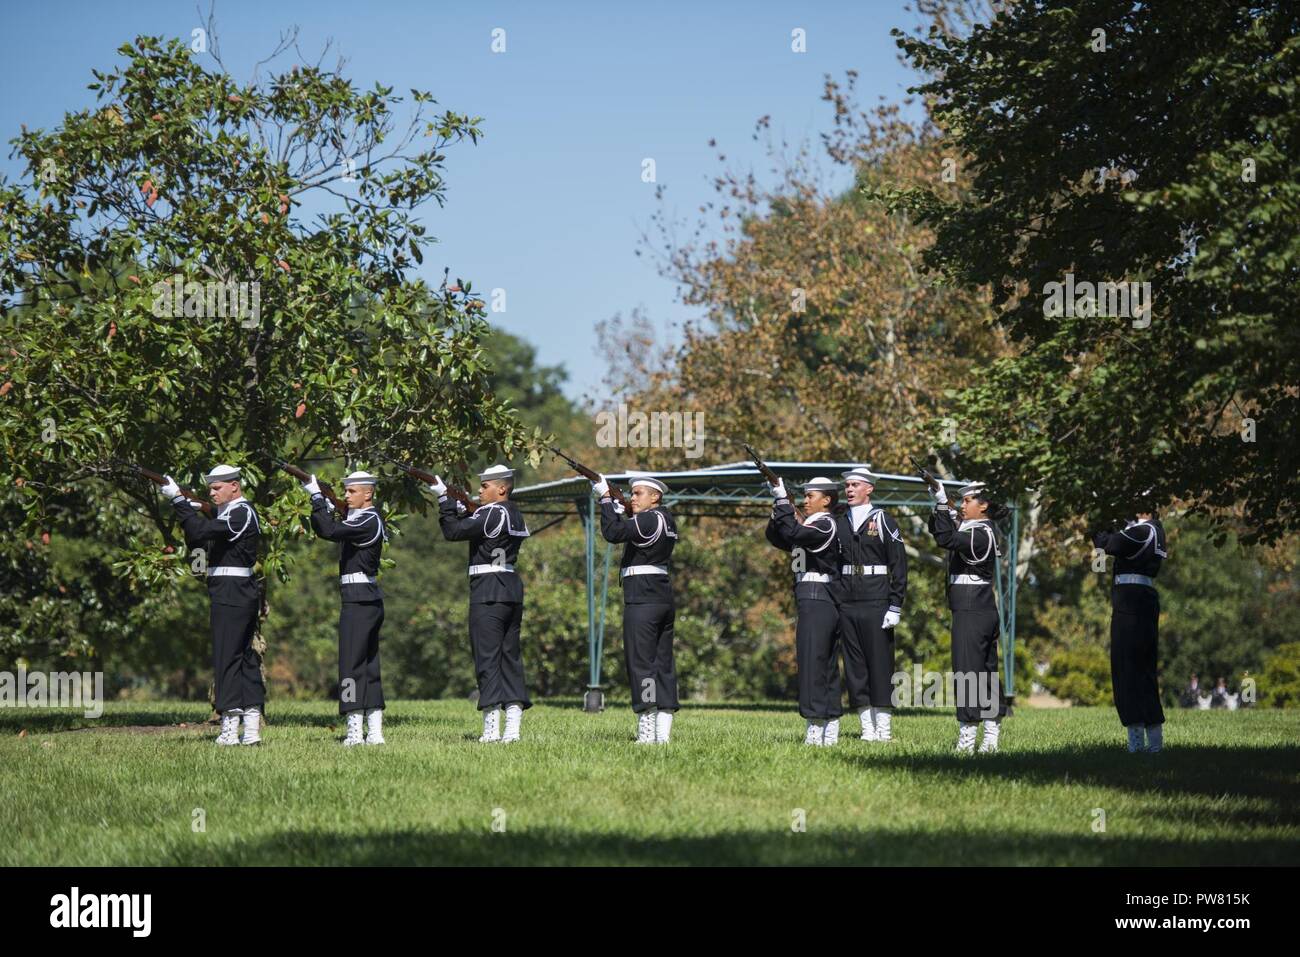 The U.S. Navy Ceremonial Guard and U.S. Navy Band participate in the graveside service for U.S. Navy Fireman 1st Class Walter B. Rogers at Arlington National Cemetery, Arlington, Va., Oct. 2, 2017.  Rogers perished on the USS Oklahoma when it was attacked by Japanese aircraft at Ford Island, Pearl Harbor on Dec. 7, 1941.  Remains of the deceased crew were recovered from December 1941 to June 1944 and were subsequently interred in the Halawa and Nu’uanu Cemeteries.  In September 1947, the remains were disinterred and 35 men from the USS Oklahoma were identified by the American Graves Registrati Stock Photo